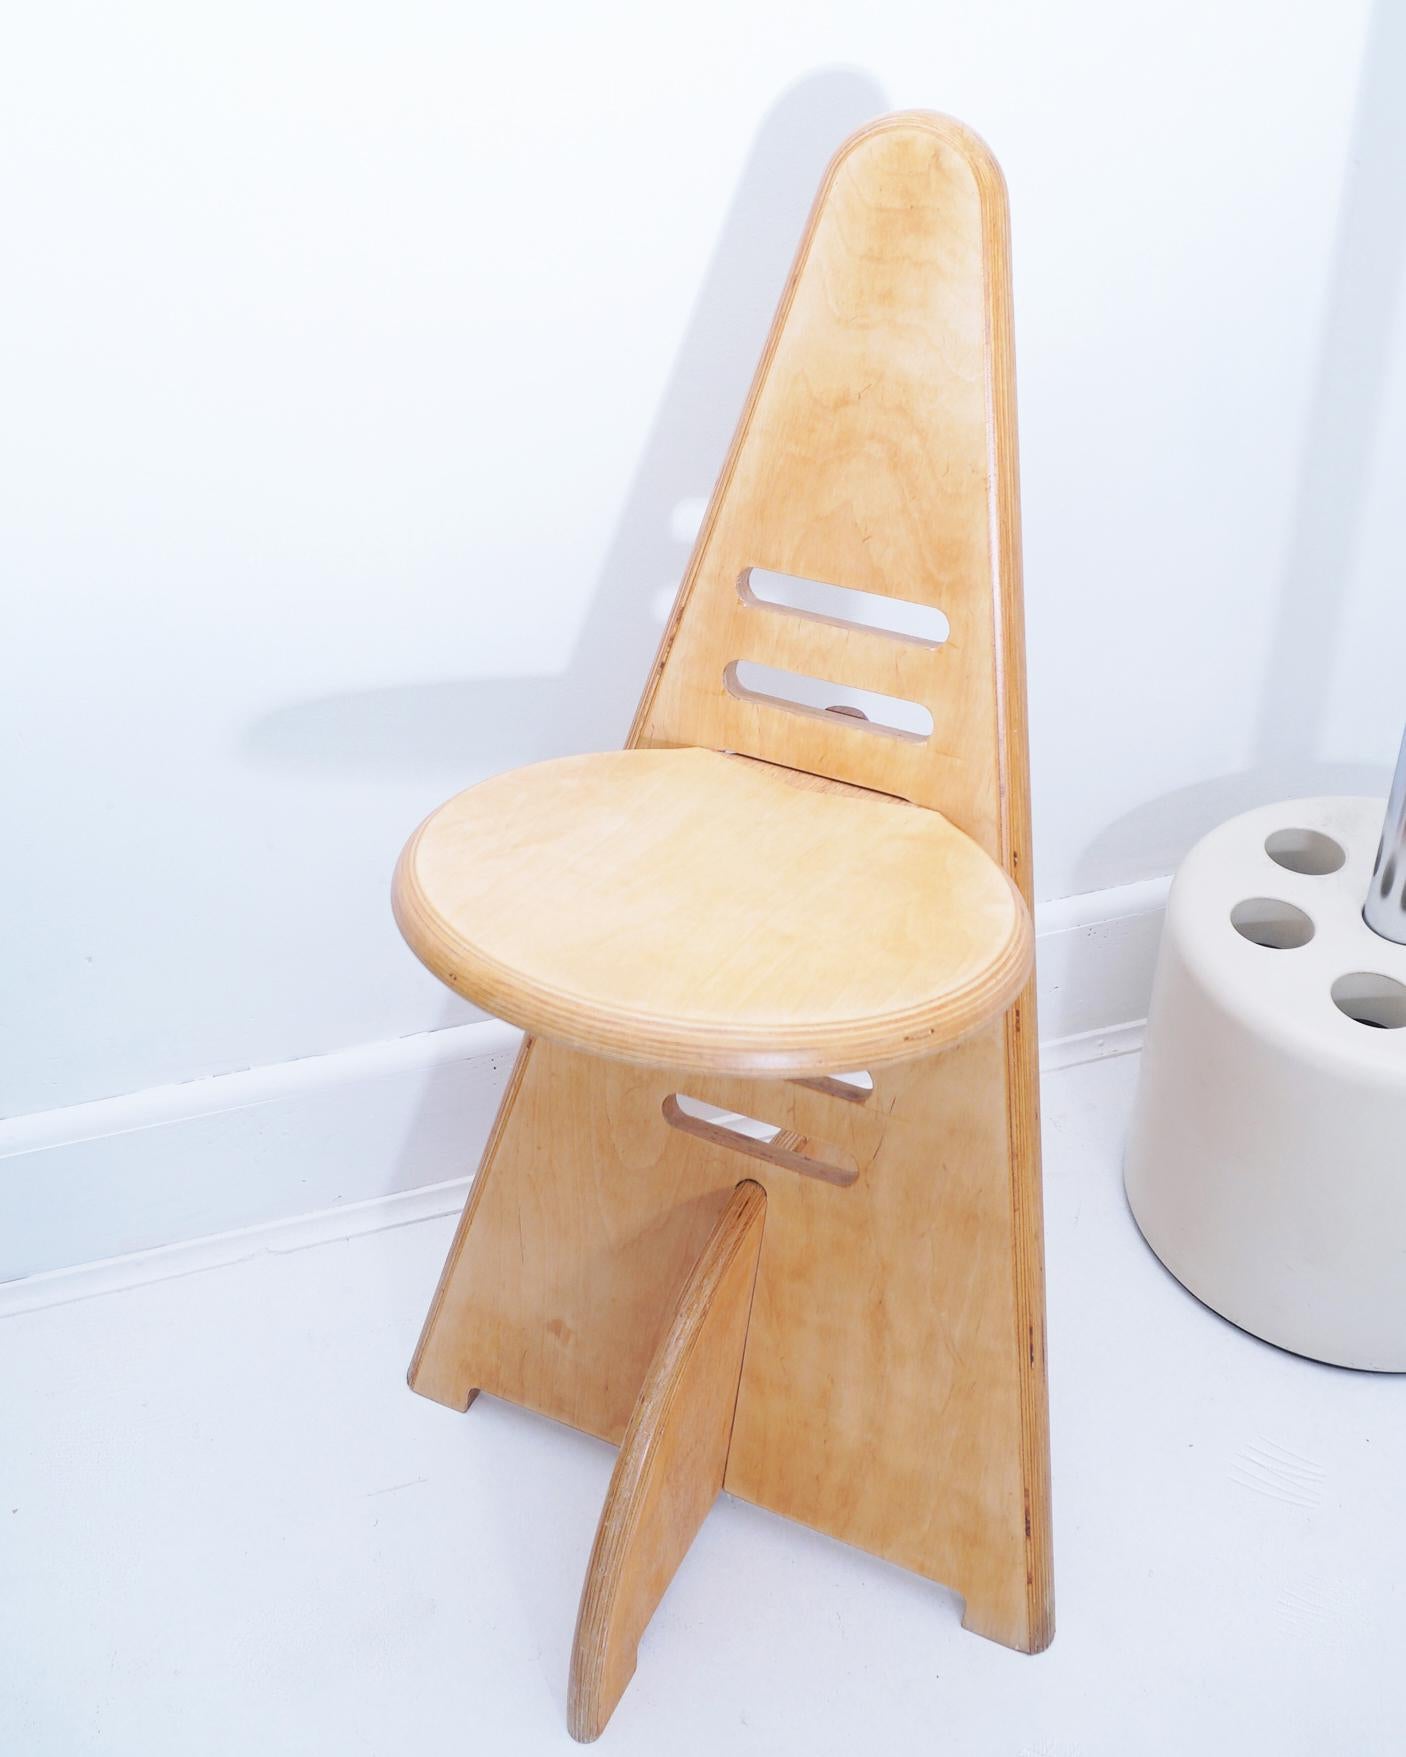 Late 20th Century 1970s Lundi Sit Chair by Gijs Boelaars for Lundia